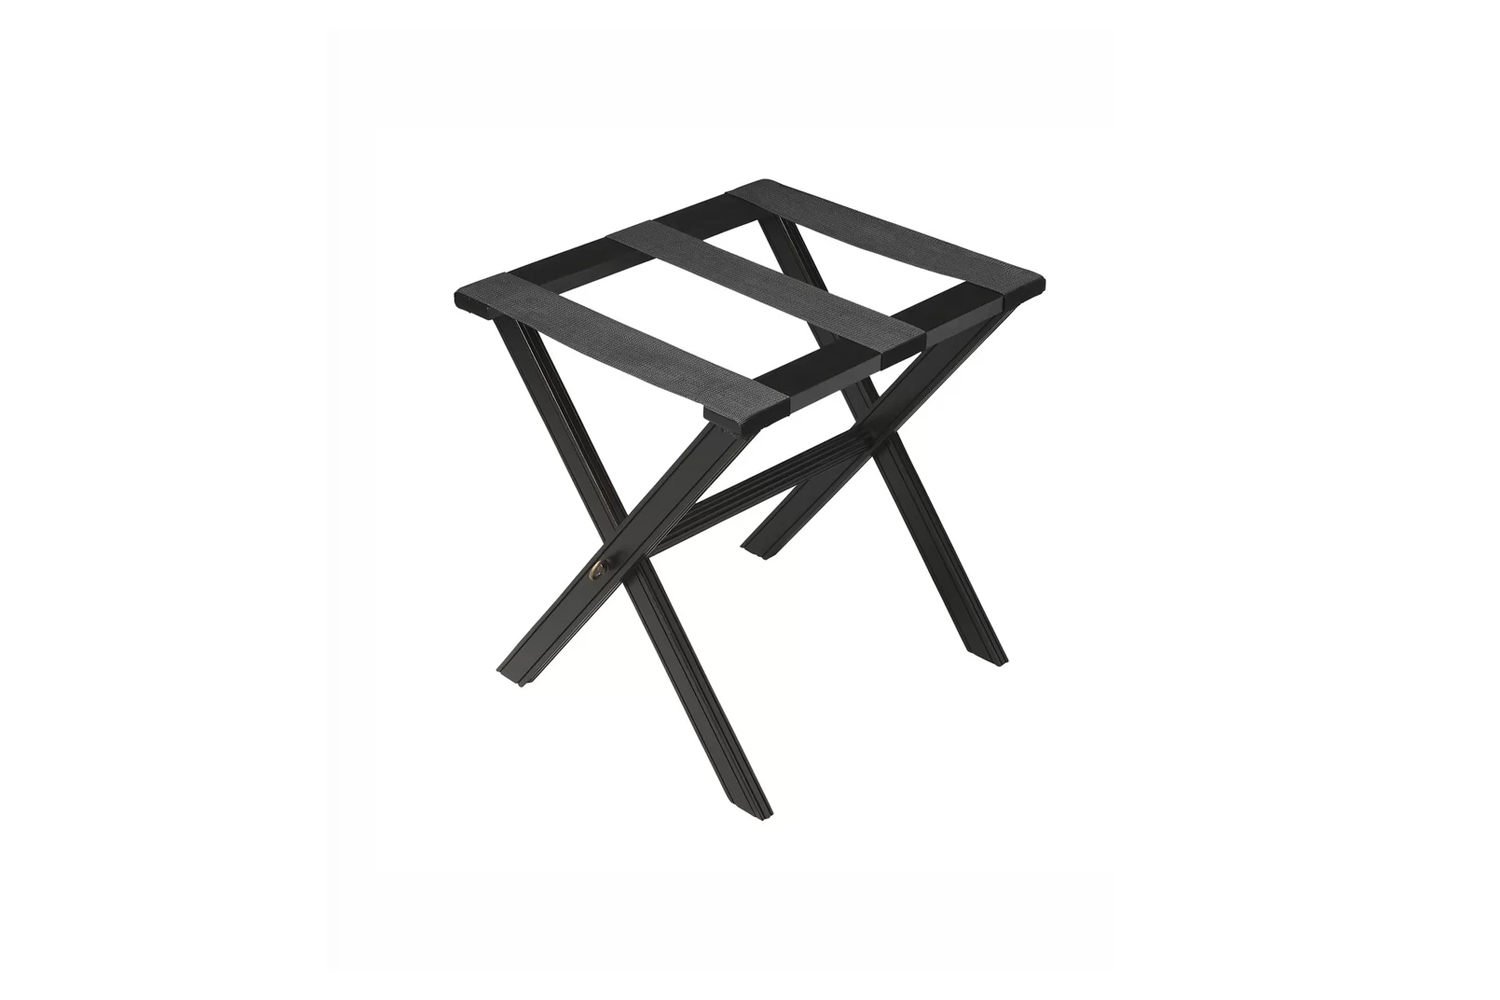 the butler folding wood luggage rack, shown in black licorice, is \$\189 at per 16